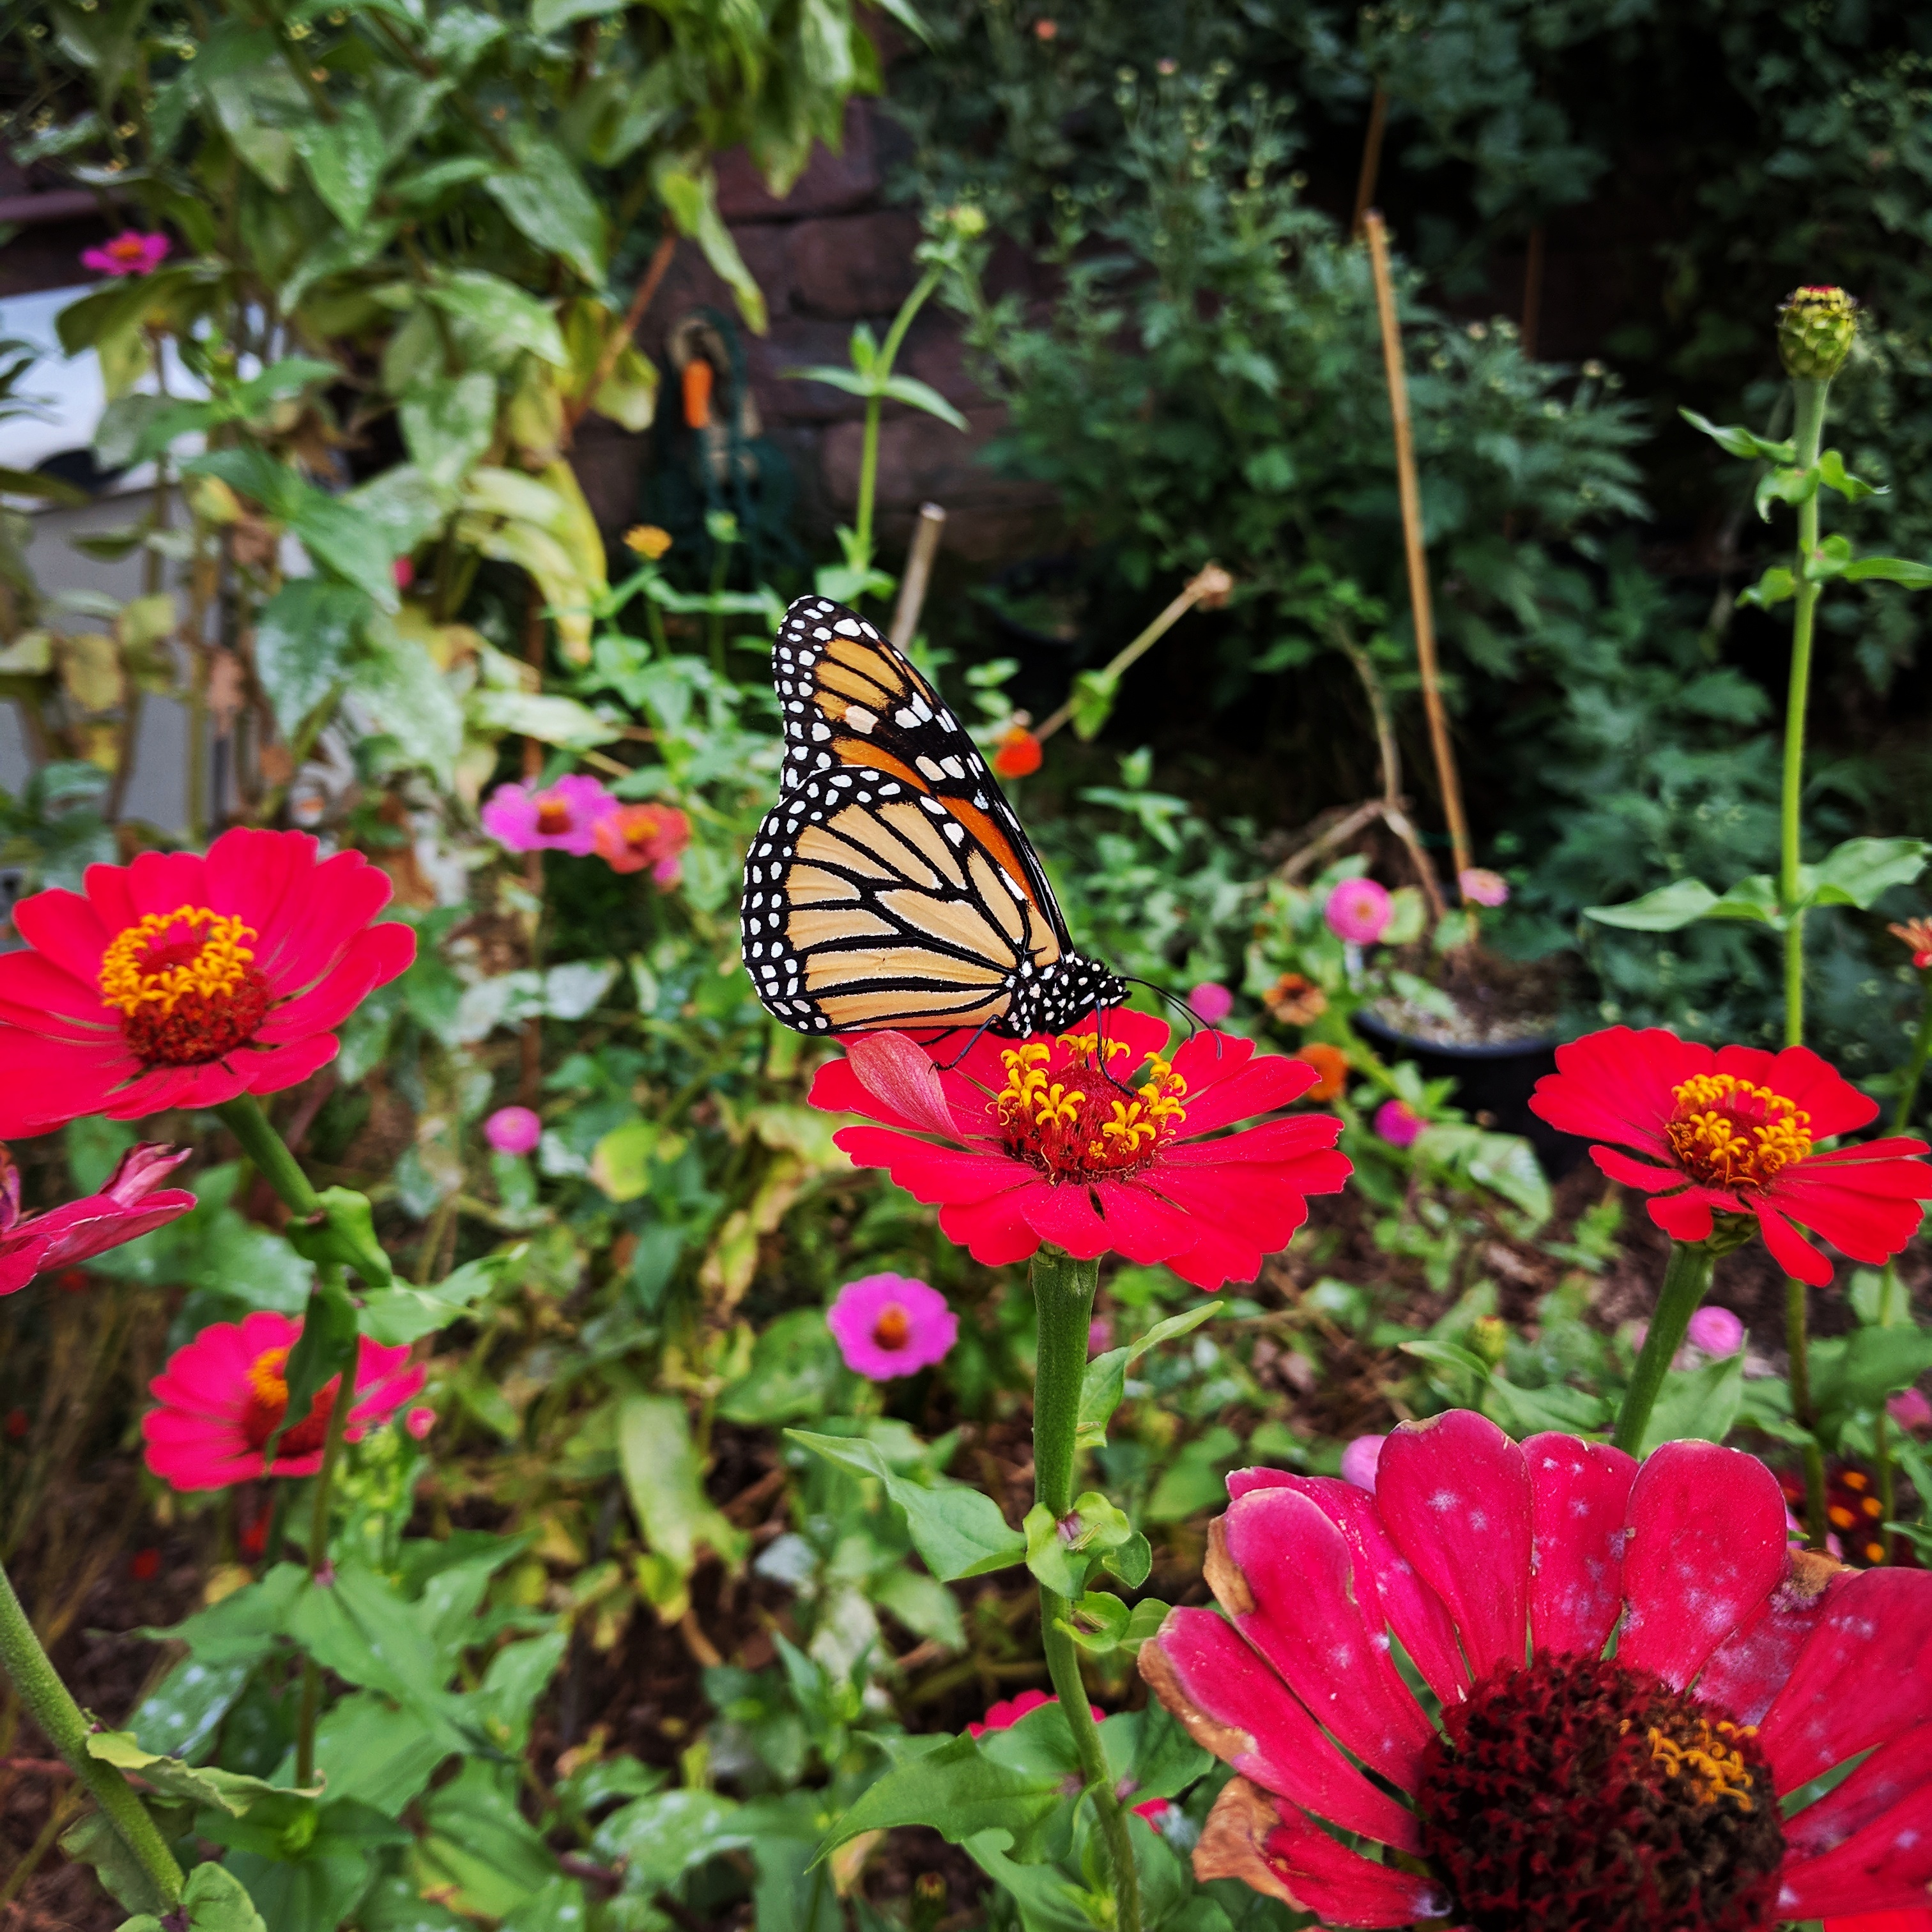 A monarch butterfly perches on a red flower. In the backround are more garden plants and a brick wall.